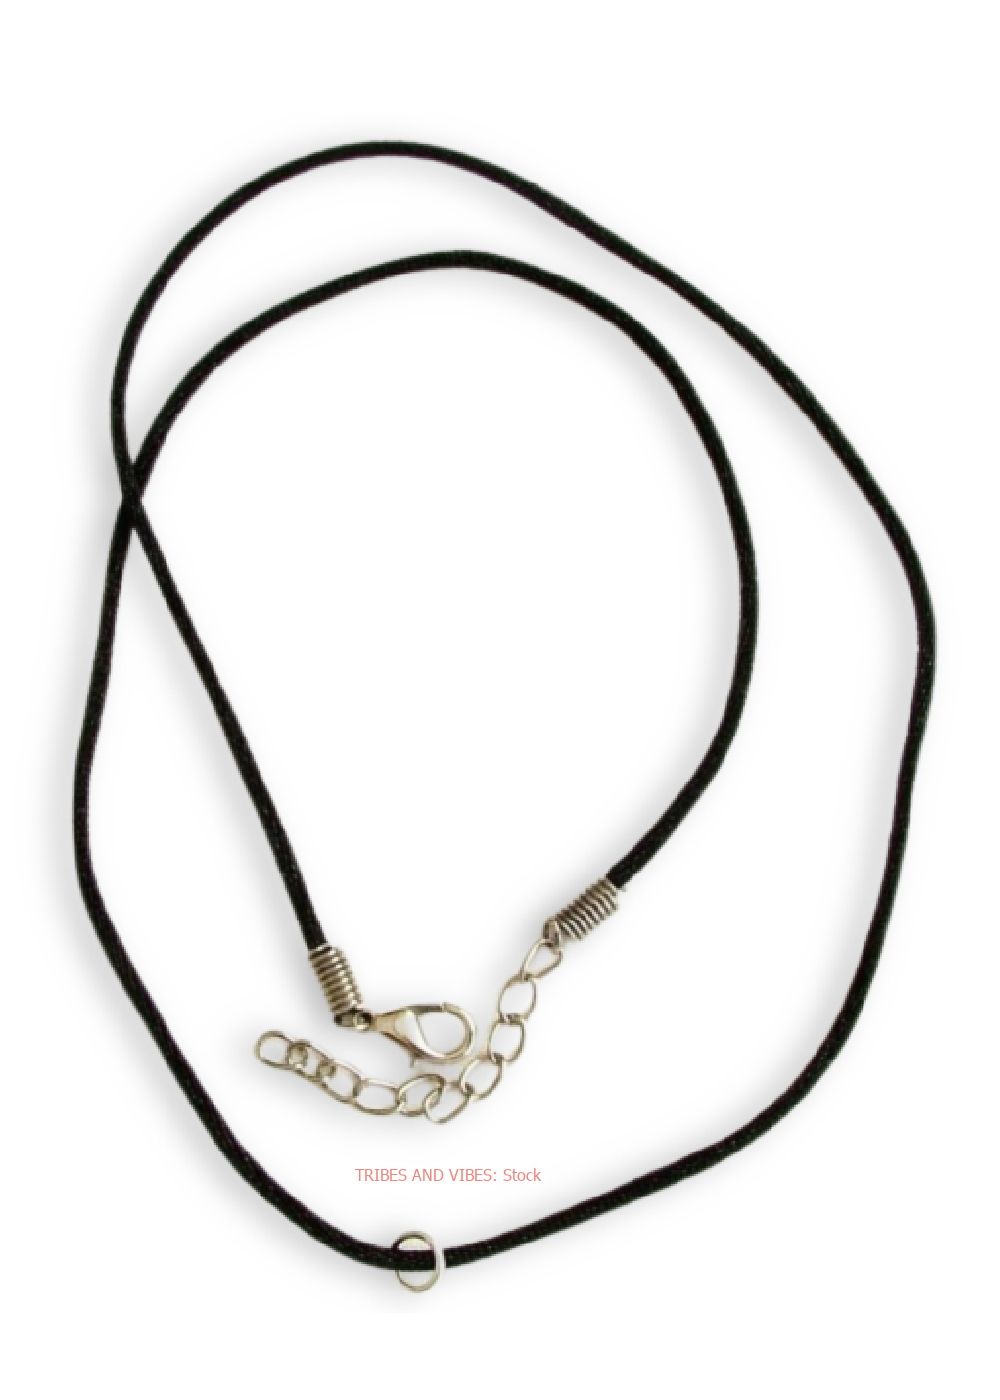 Black synthetic Necklace 46-49.5cm (stock)